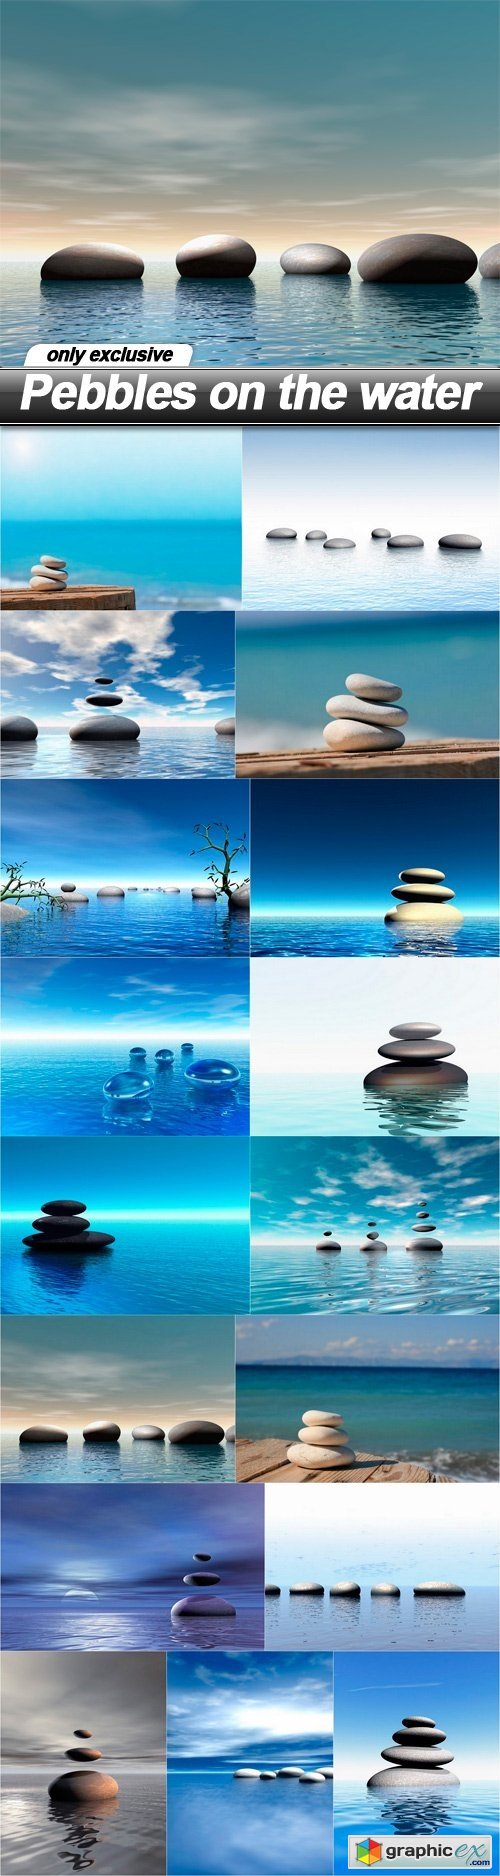 Pebbles on the water - 17 UHQ JPEG